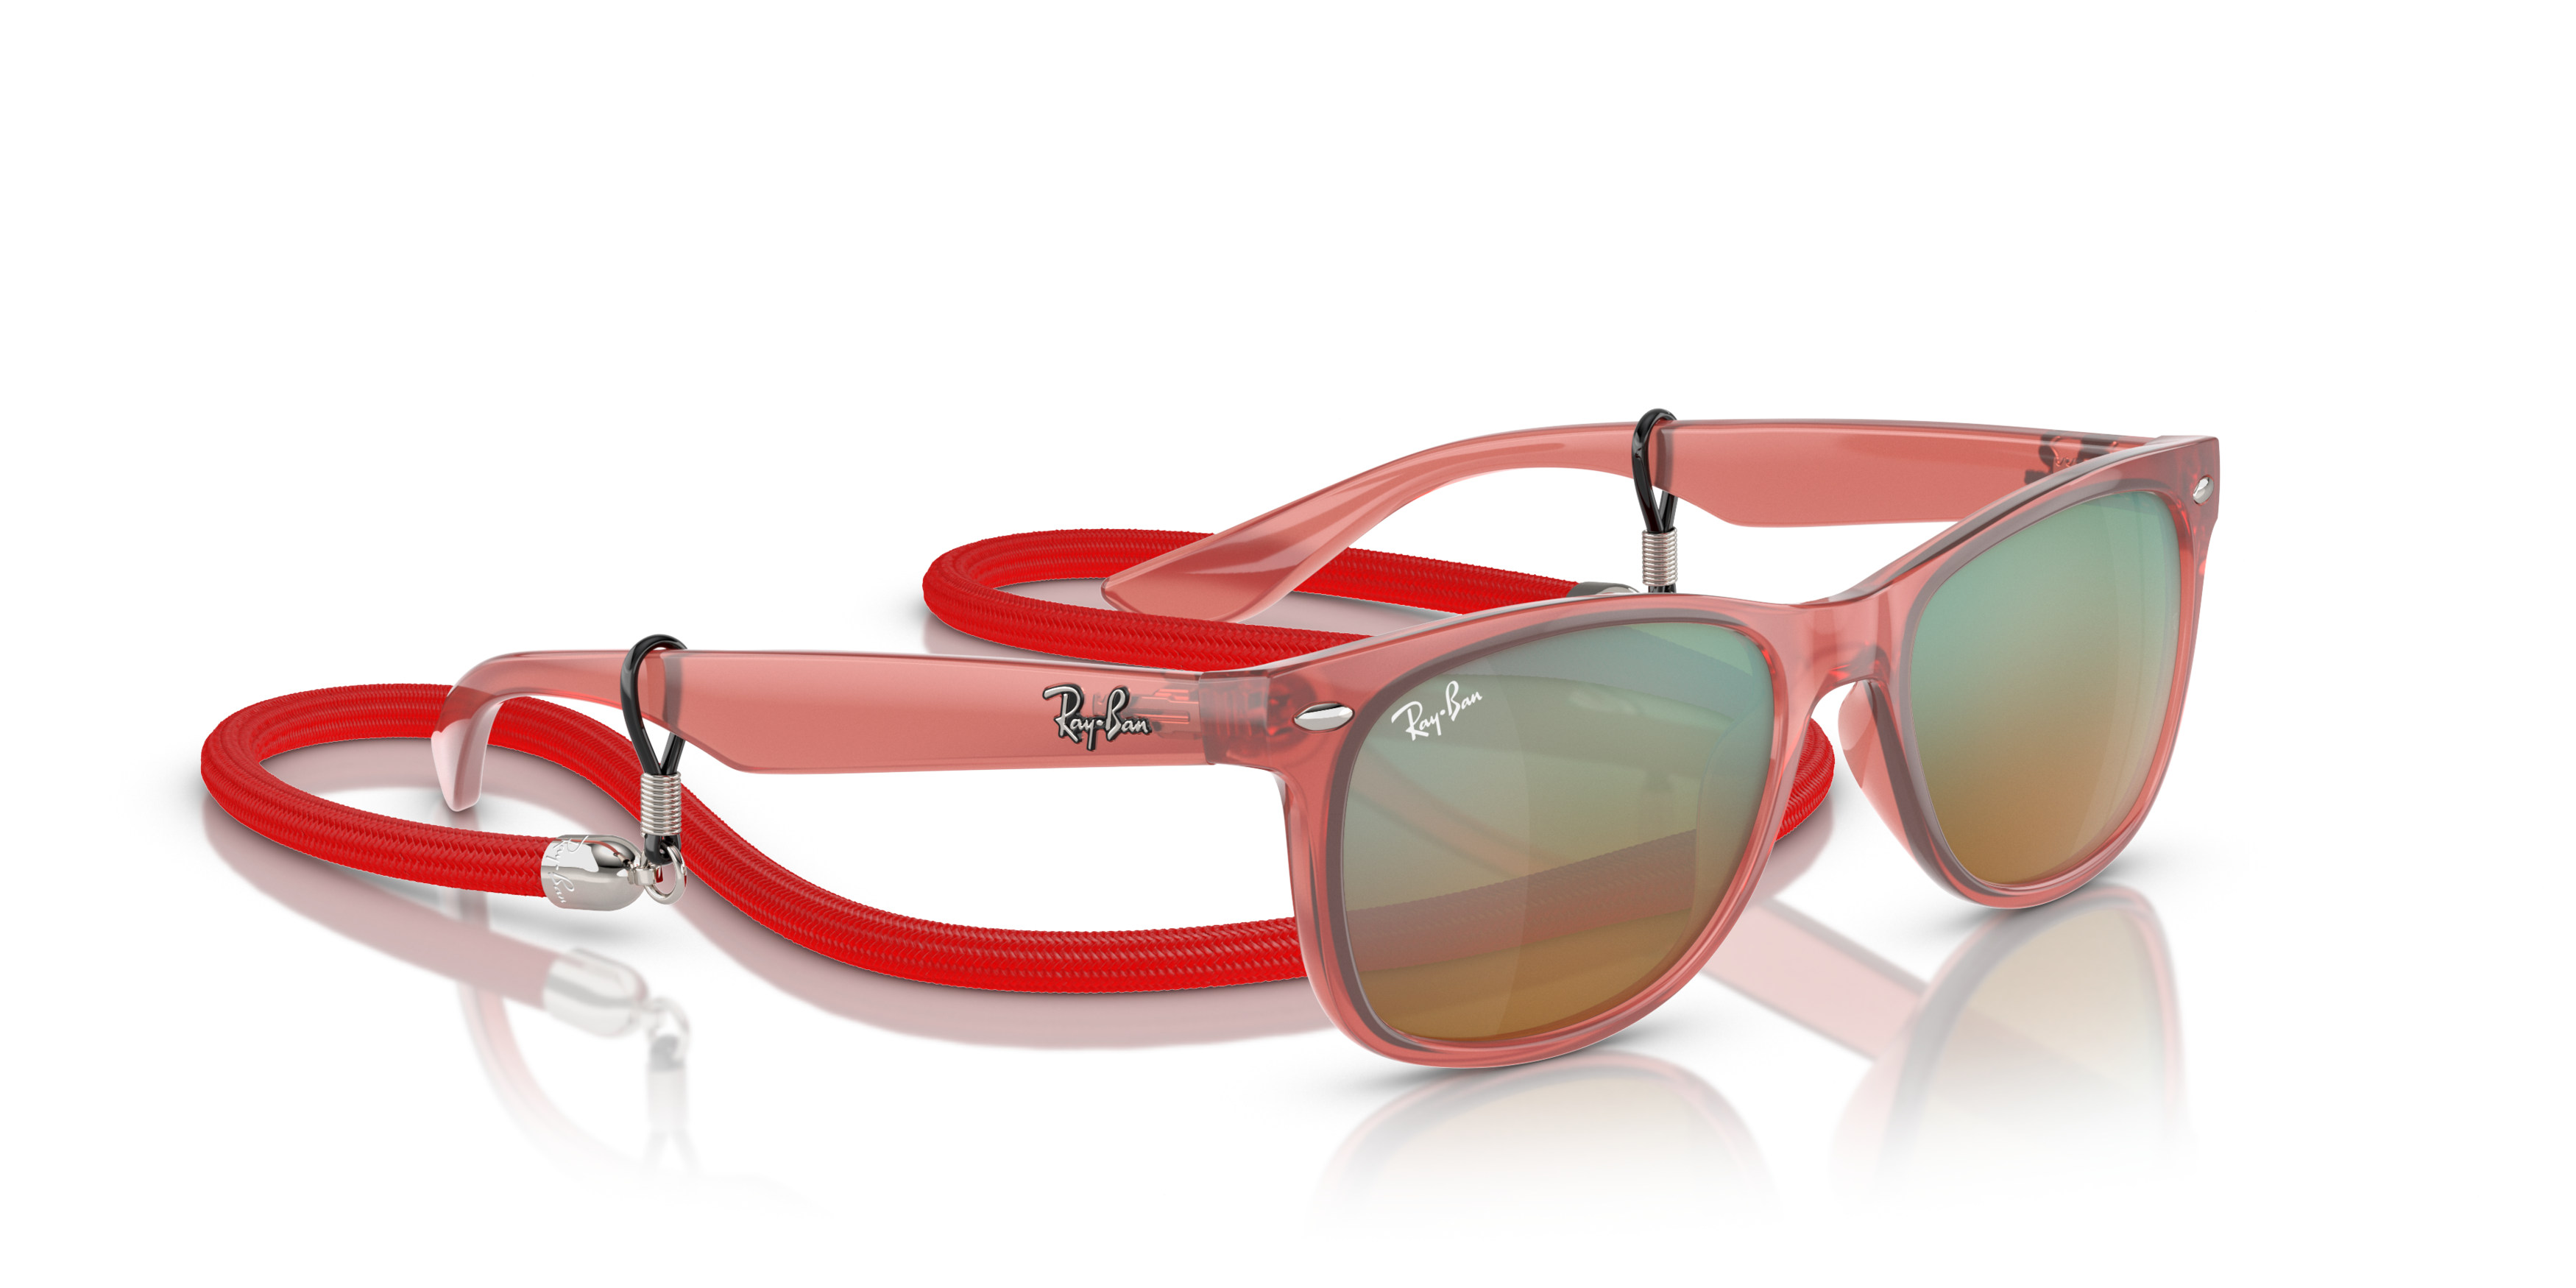 Angle_Right01 Ray-Ban RJ9052S Children's Sunglasses Silver / Transparent, Red